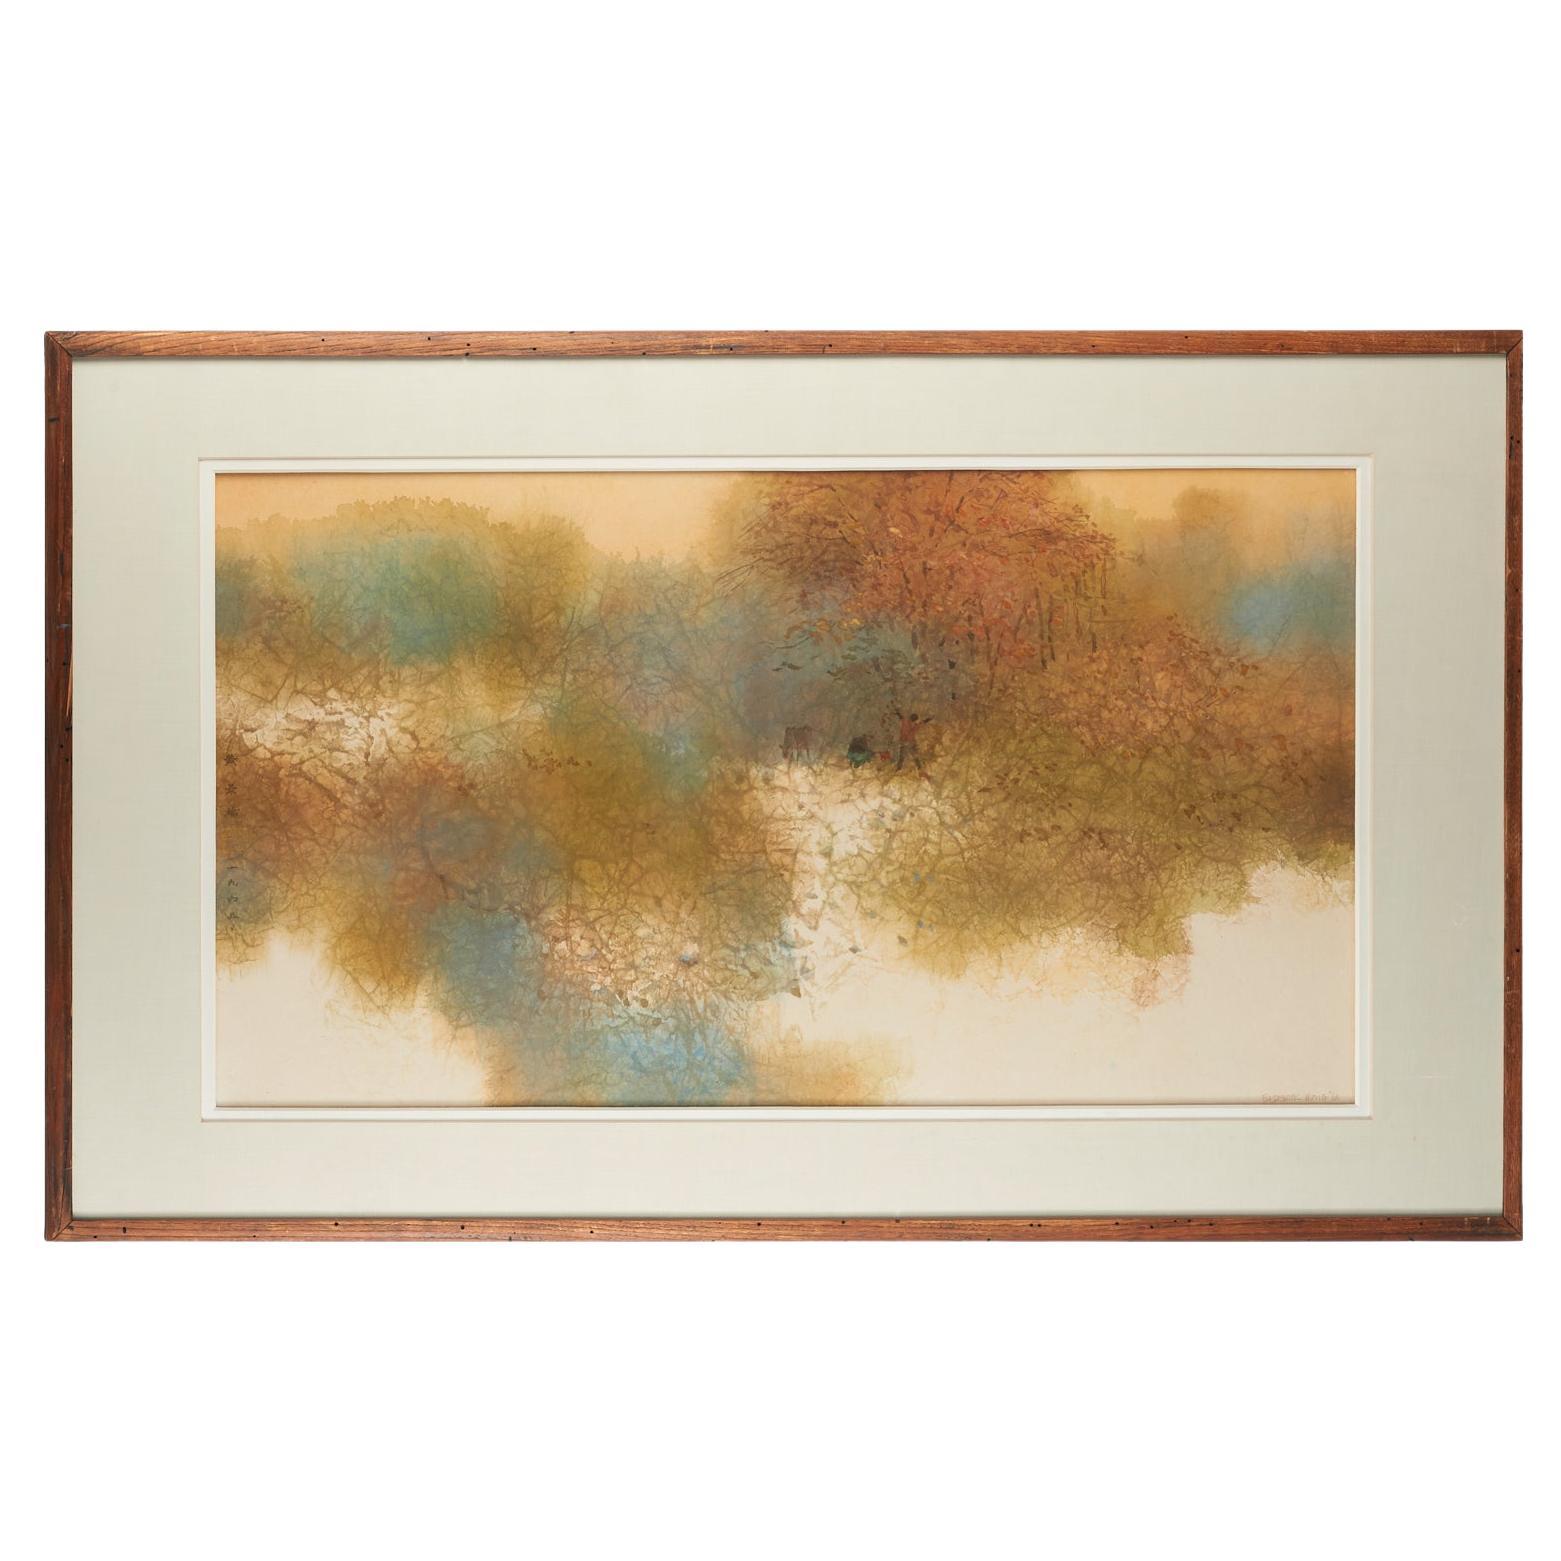 1965, Framed Winter Scene Watercolor and Gouache on Masa Paper, Frederick Wong